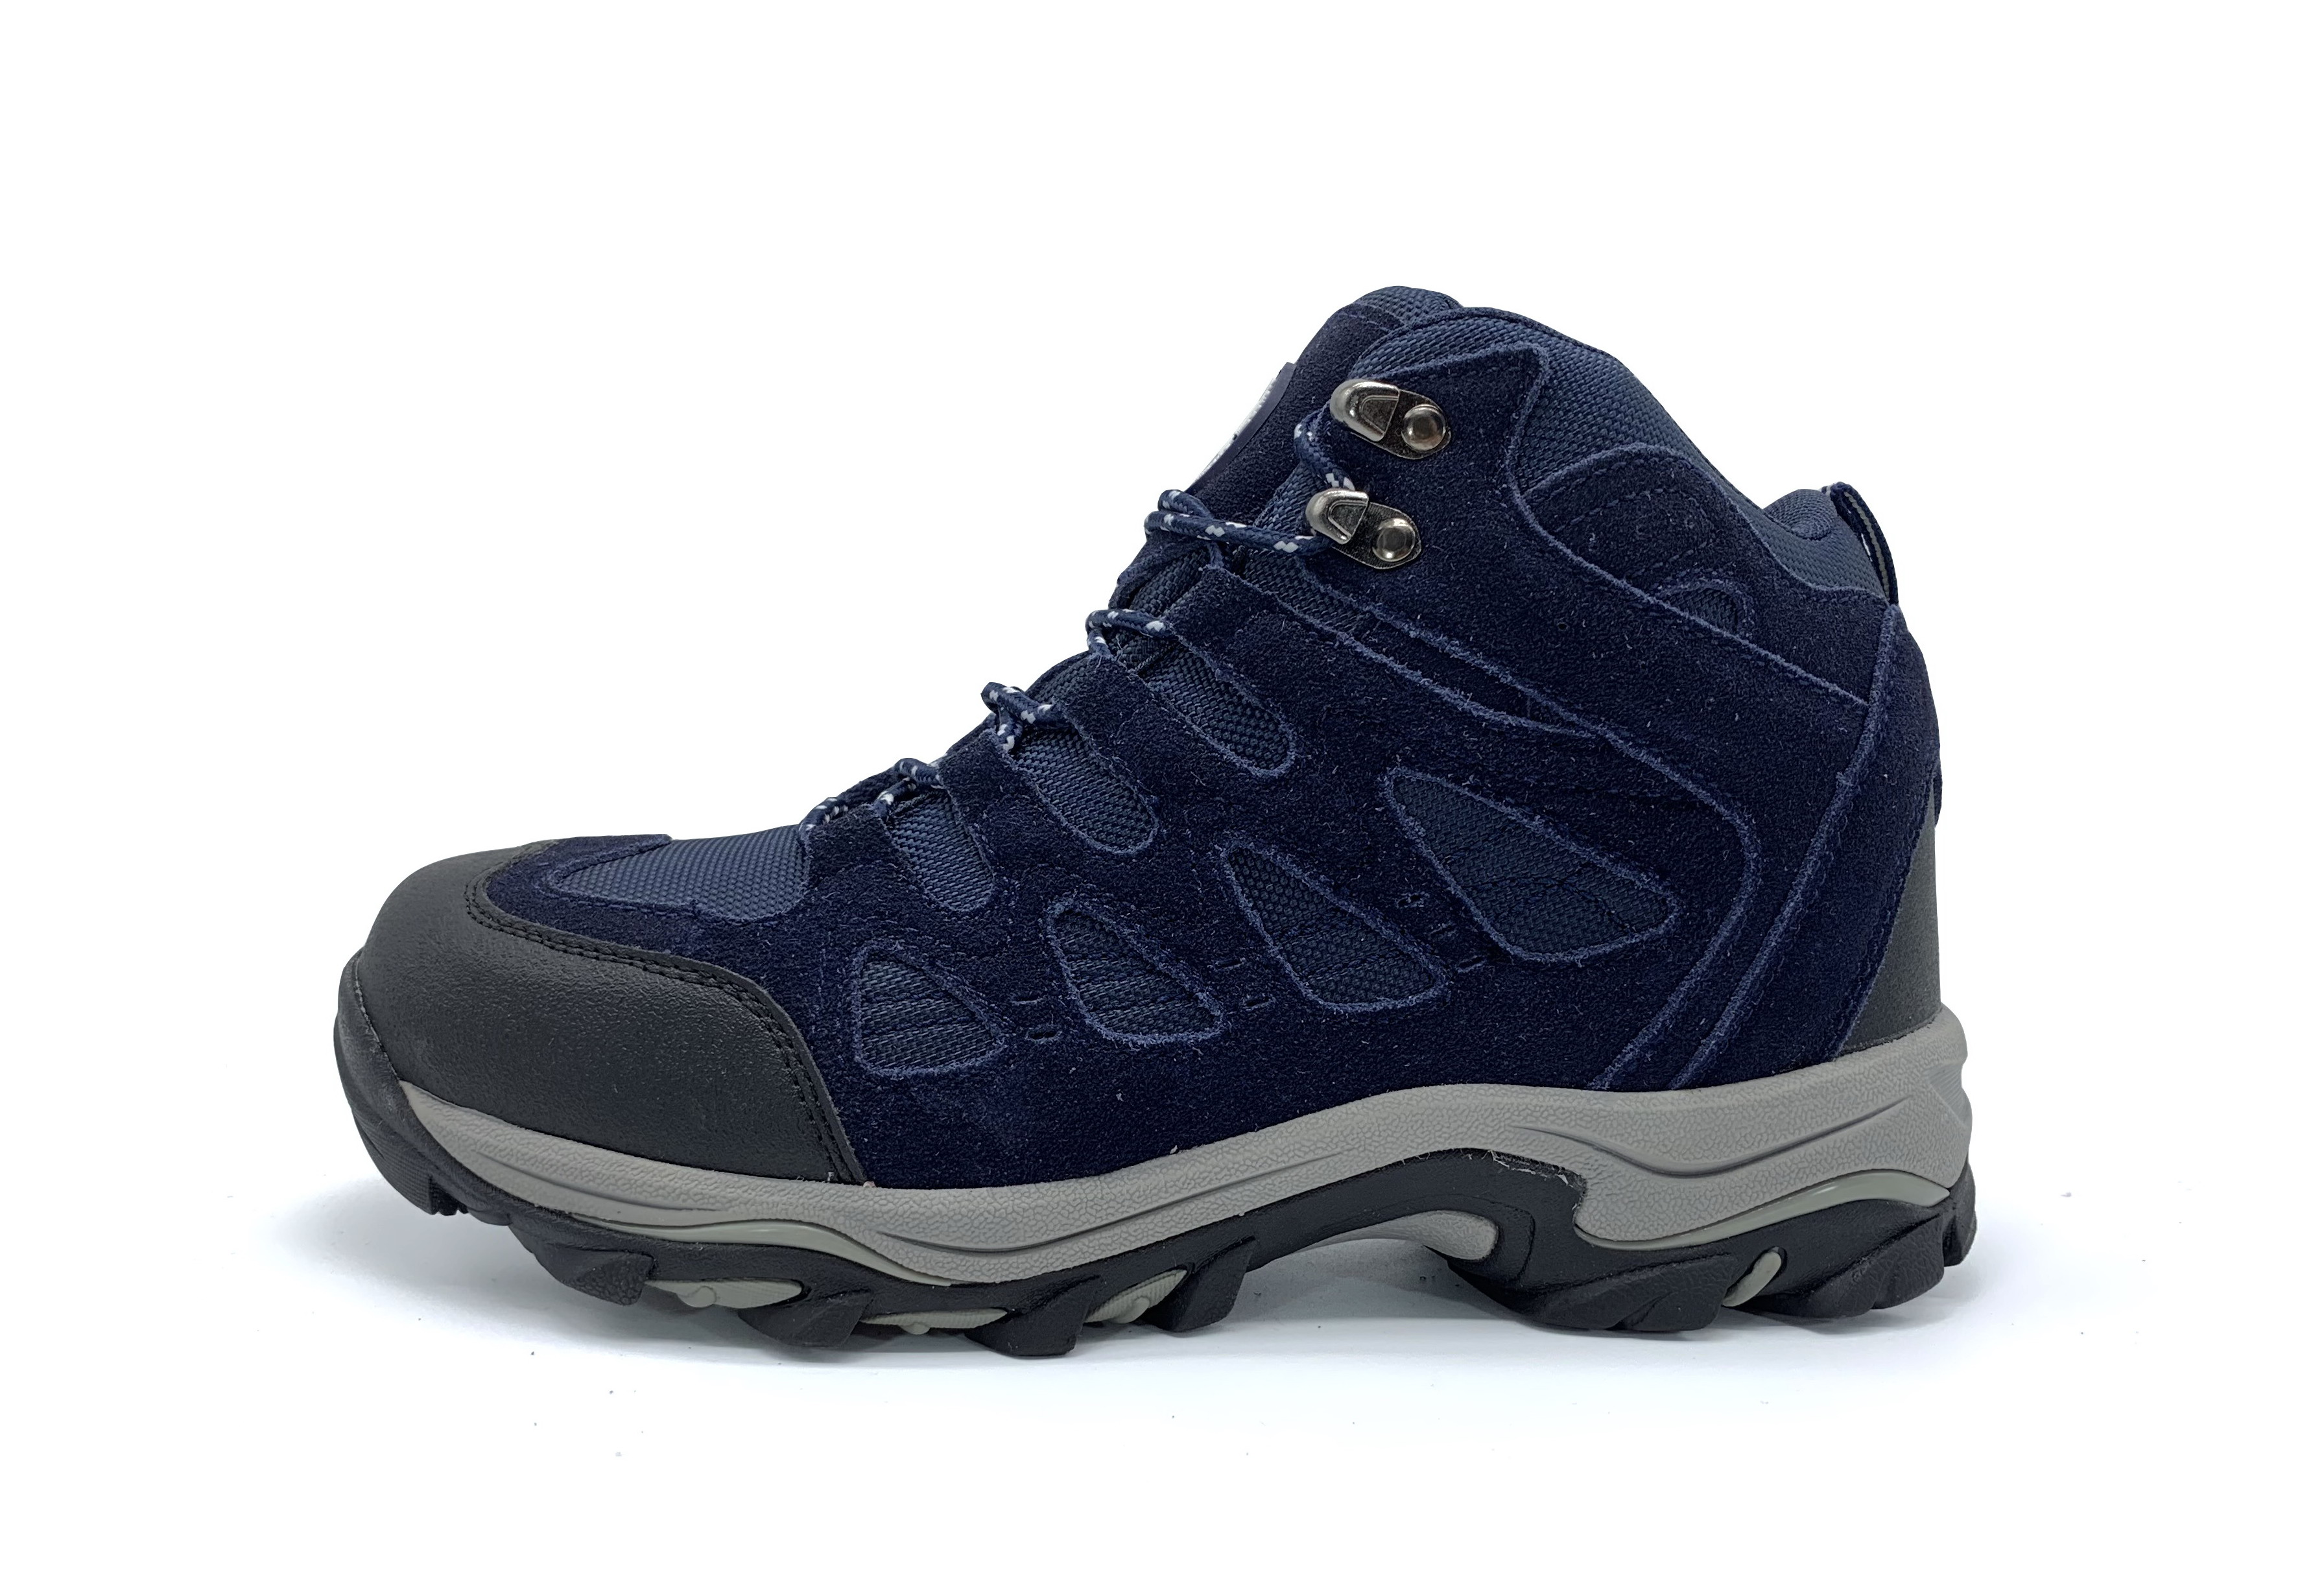 best outdoor boots mens hiking shoes